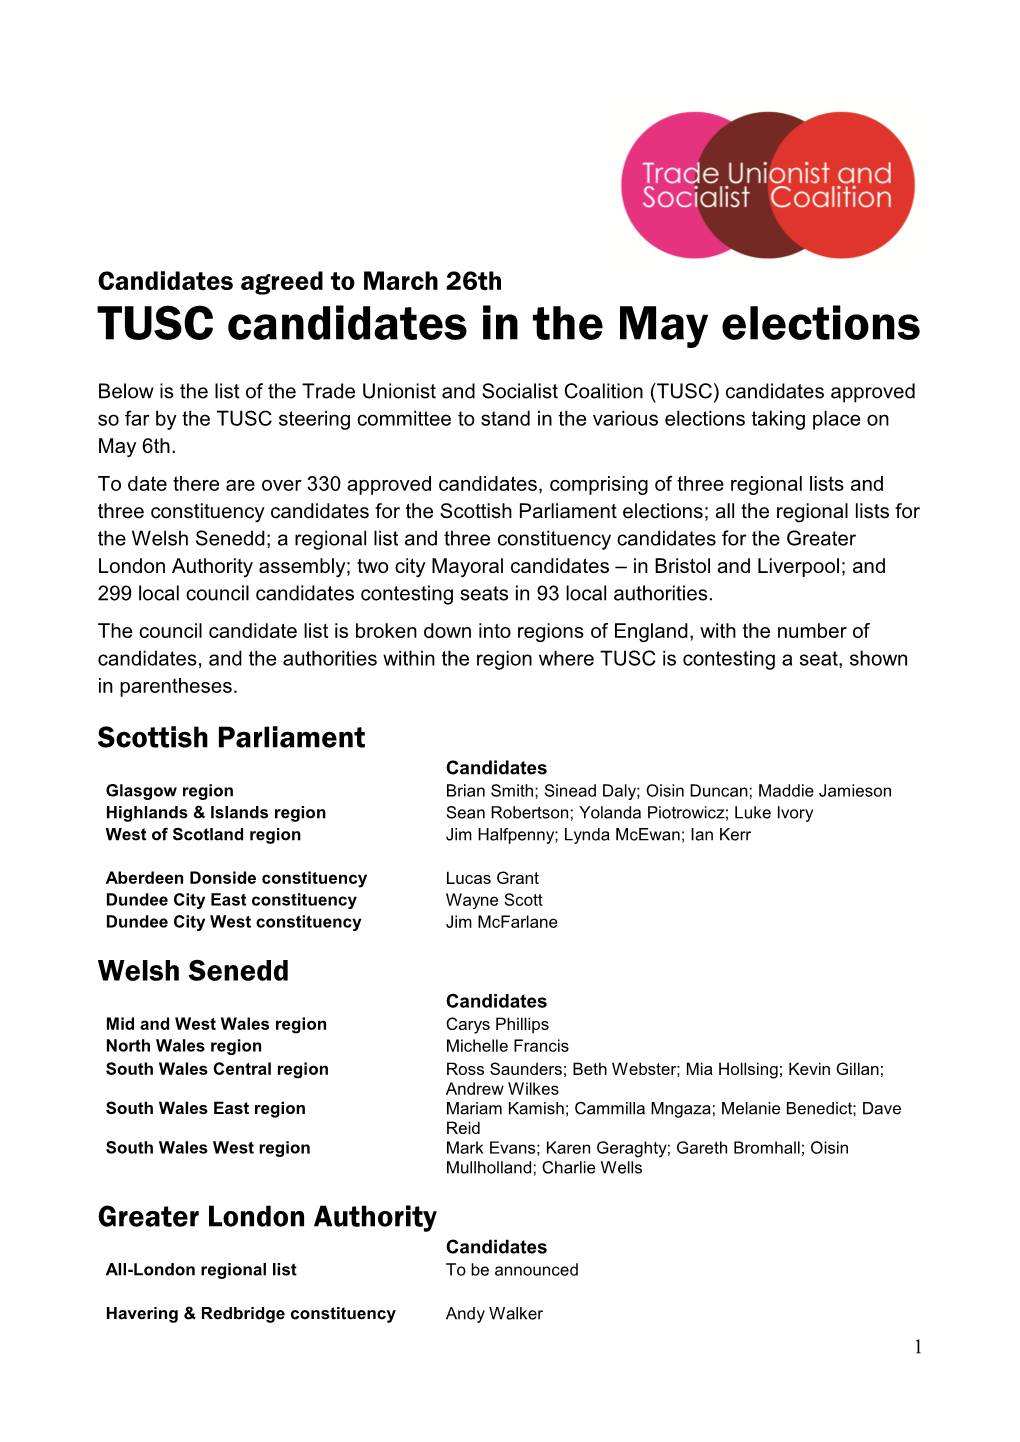 TUSC Candidates in the May Elections